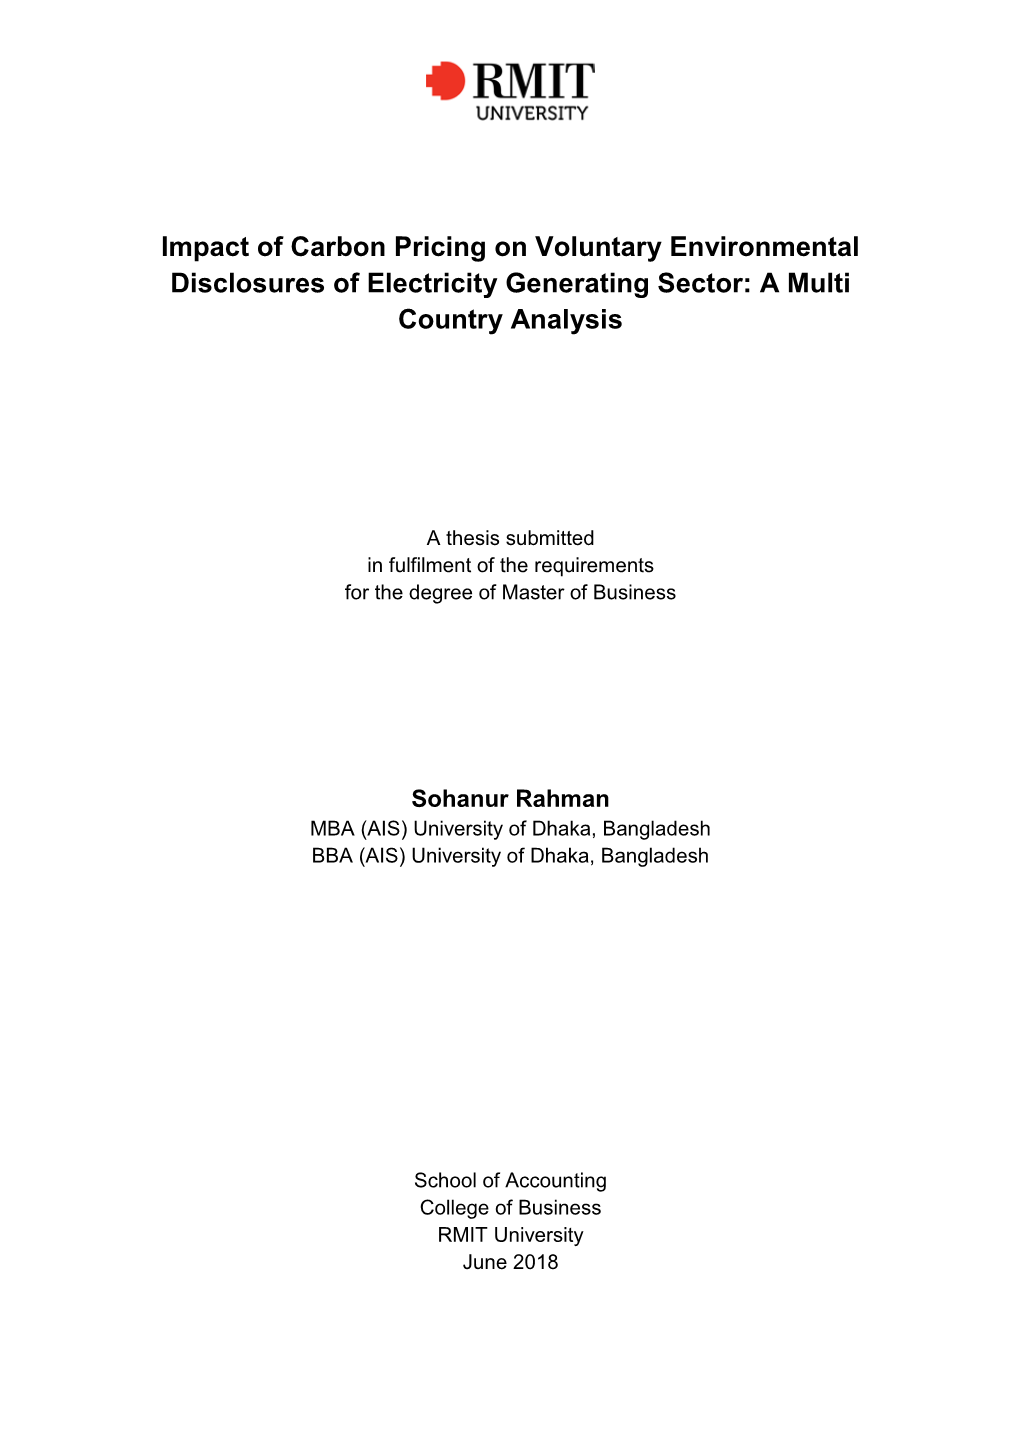 Impact of Carbon Pricing on Voluntary Environmental Disclosures of Electricity Generating Sector: a Multi Country Analysis